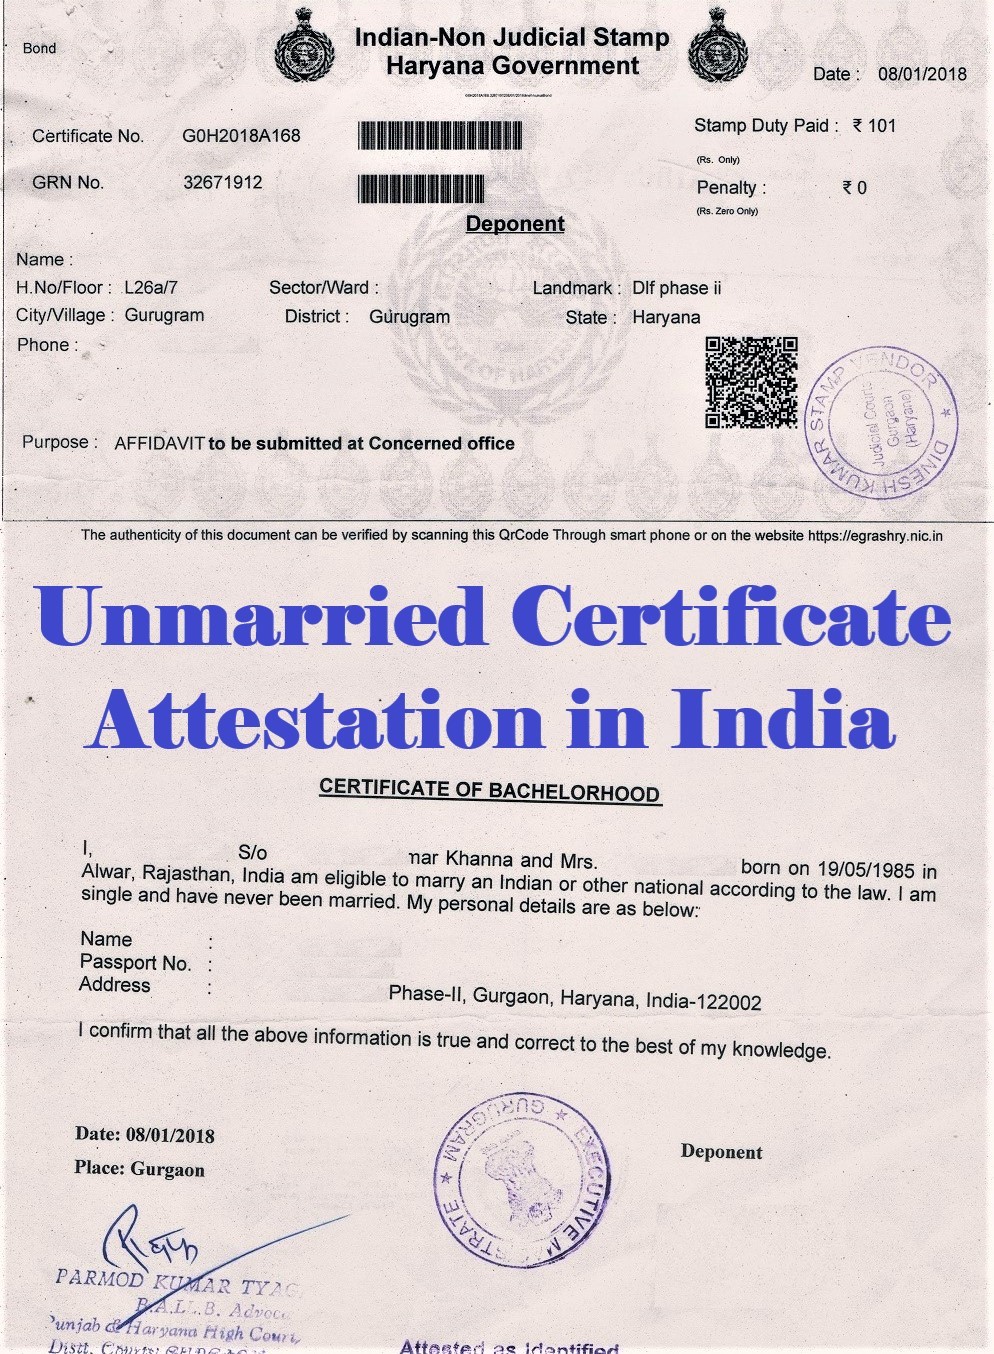 Unmarried Certificate Attestation from Colombia Embassy